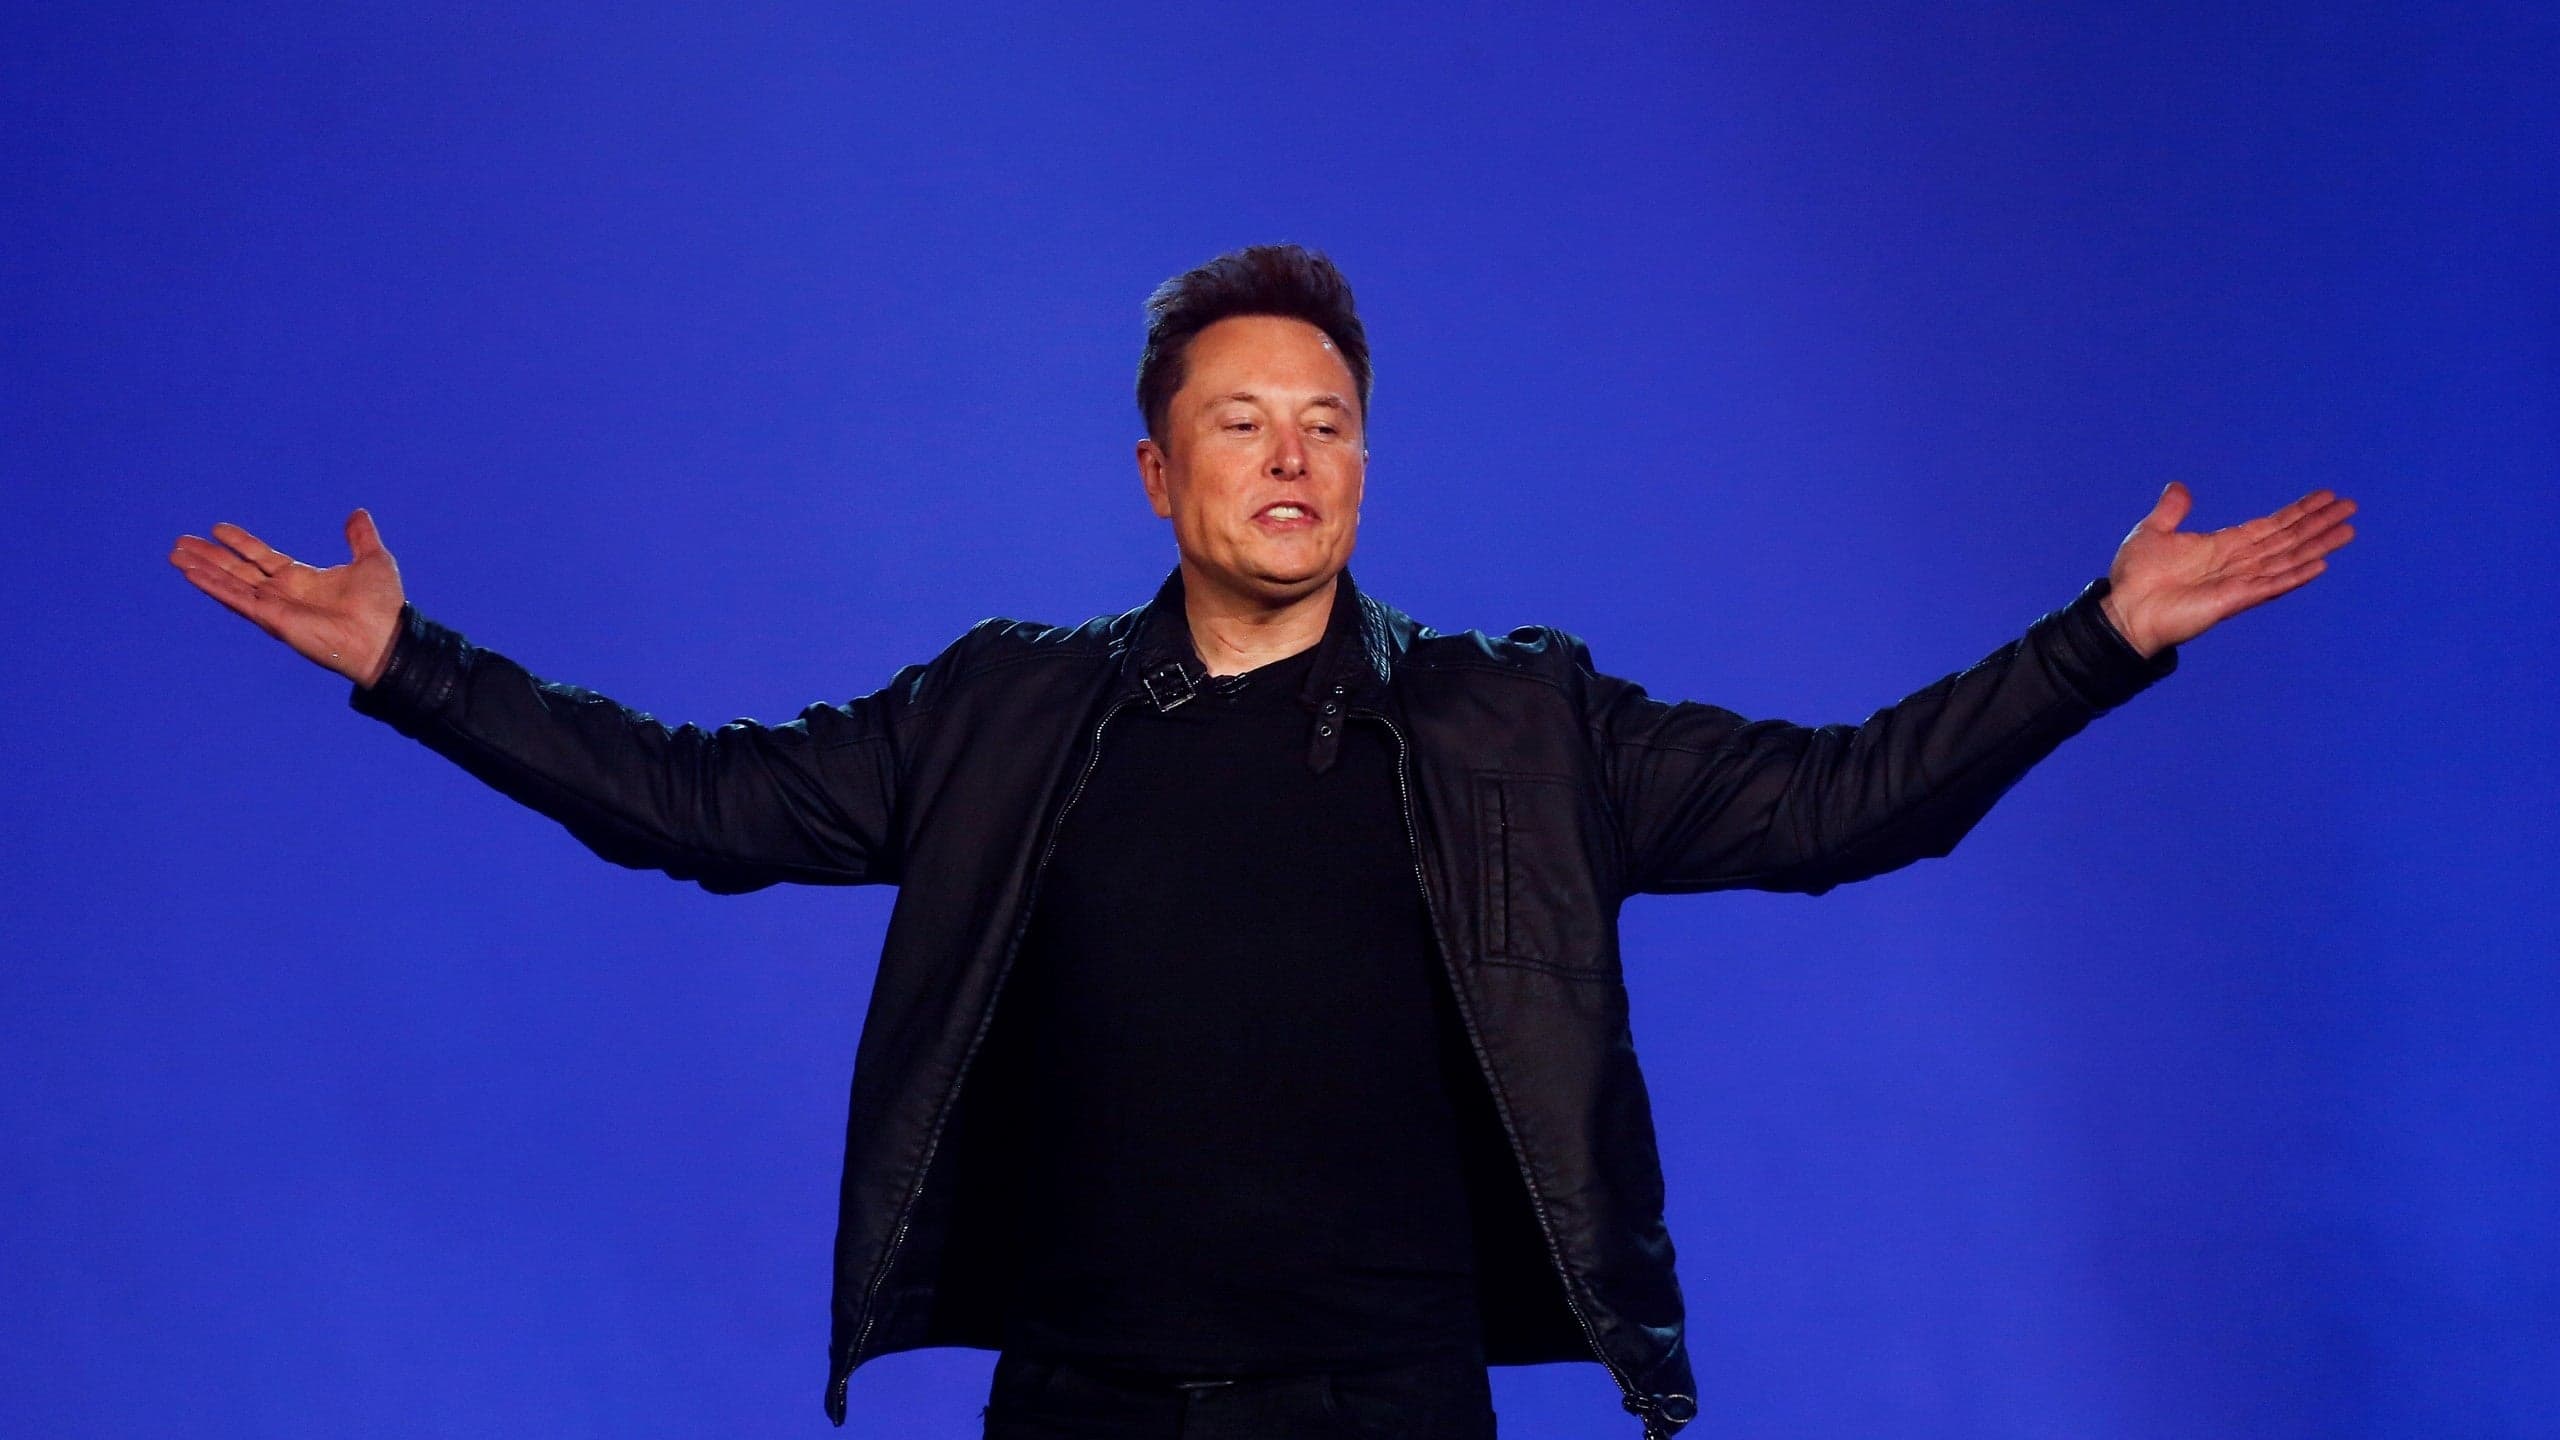 Elon Musk Is Now Richer Than Bill Gates as the World’s Second-Wealthiest Person